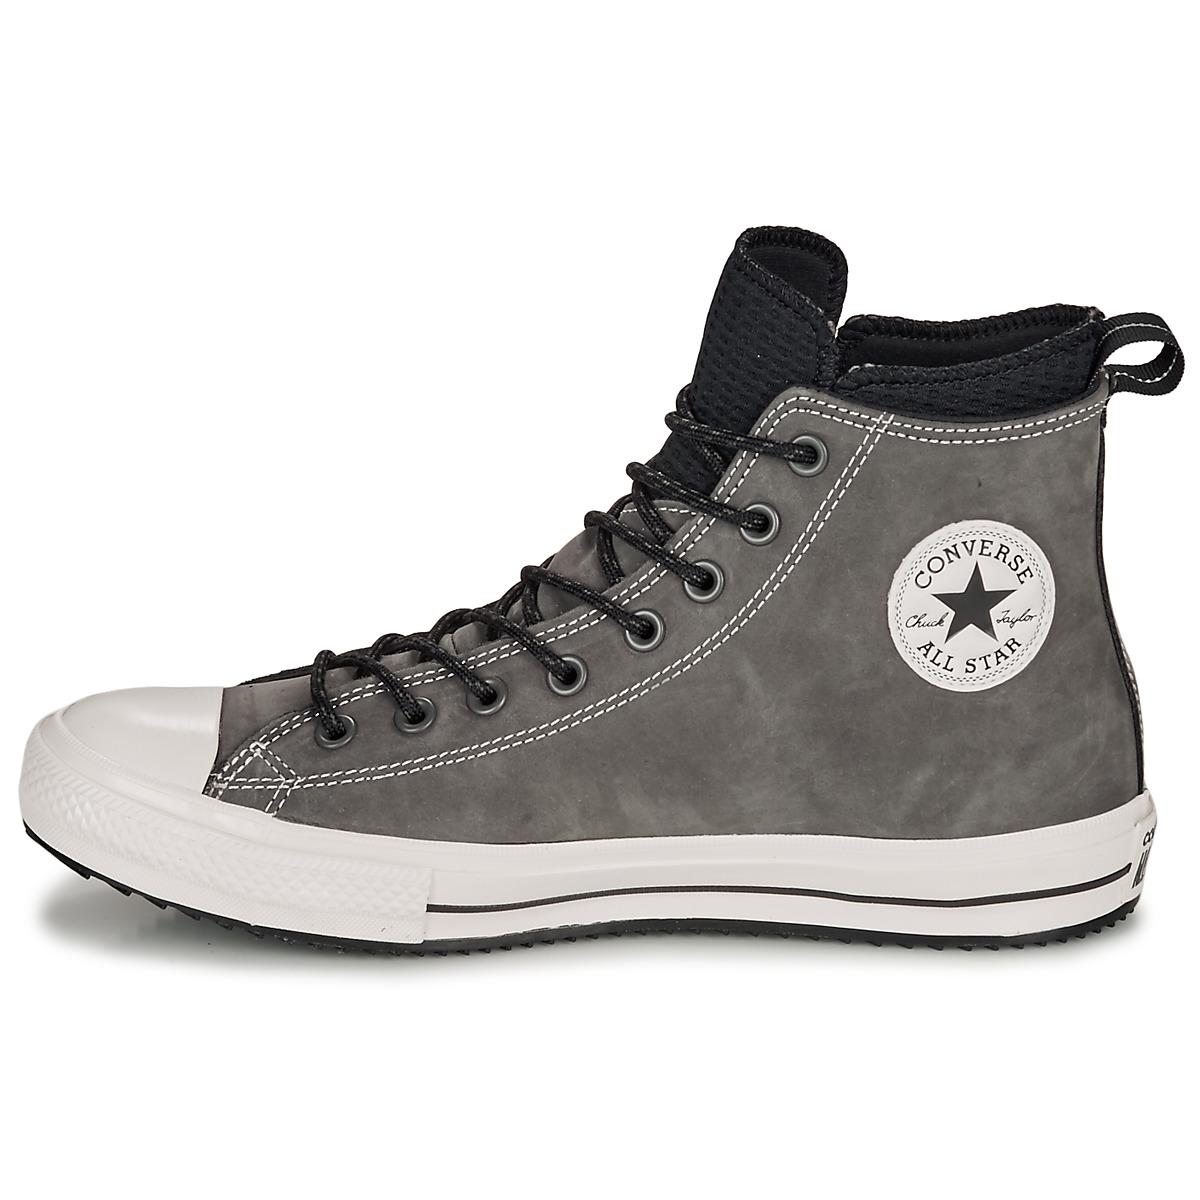 Converse Leather Chuck Taylor All Star Wp Boot Hi Shoes (high-top Trainers)  in Grey (Grey) for Men - Lyst